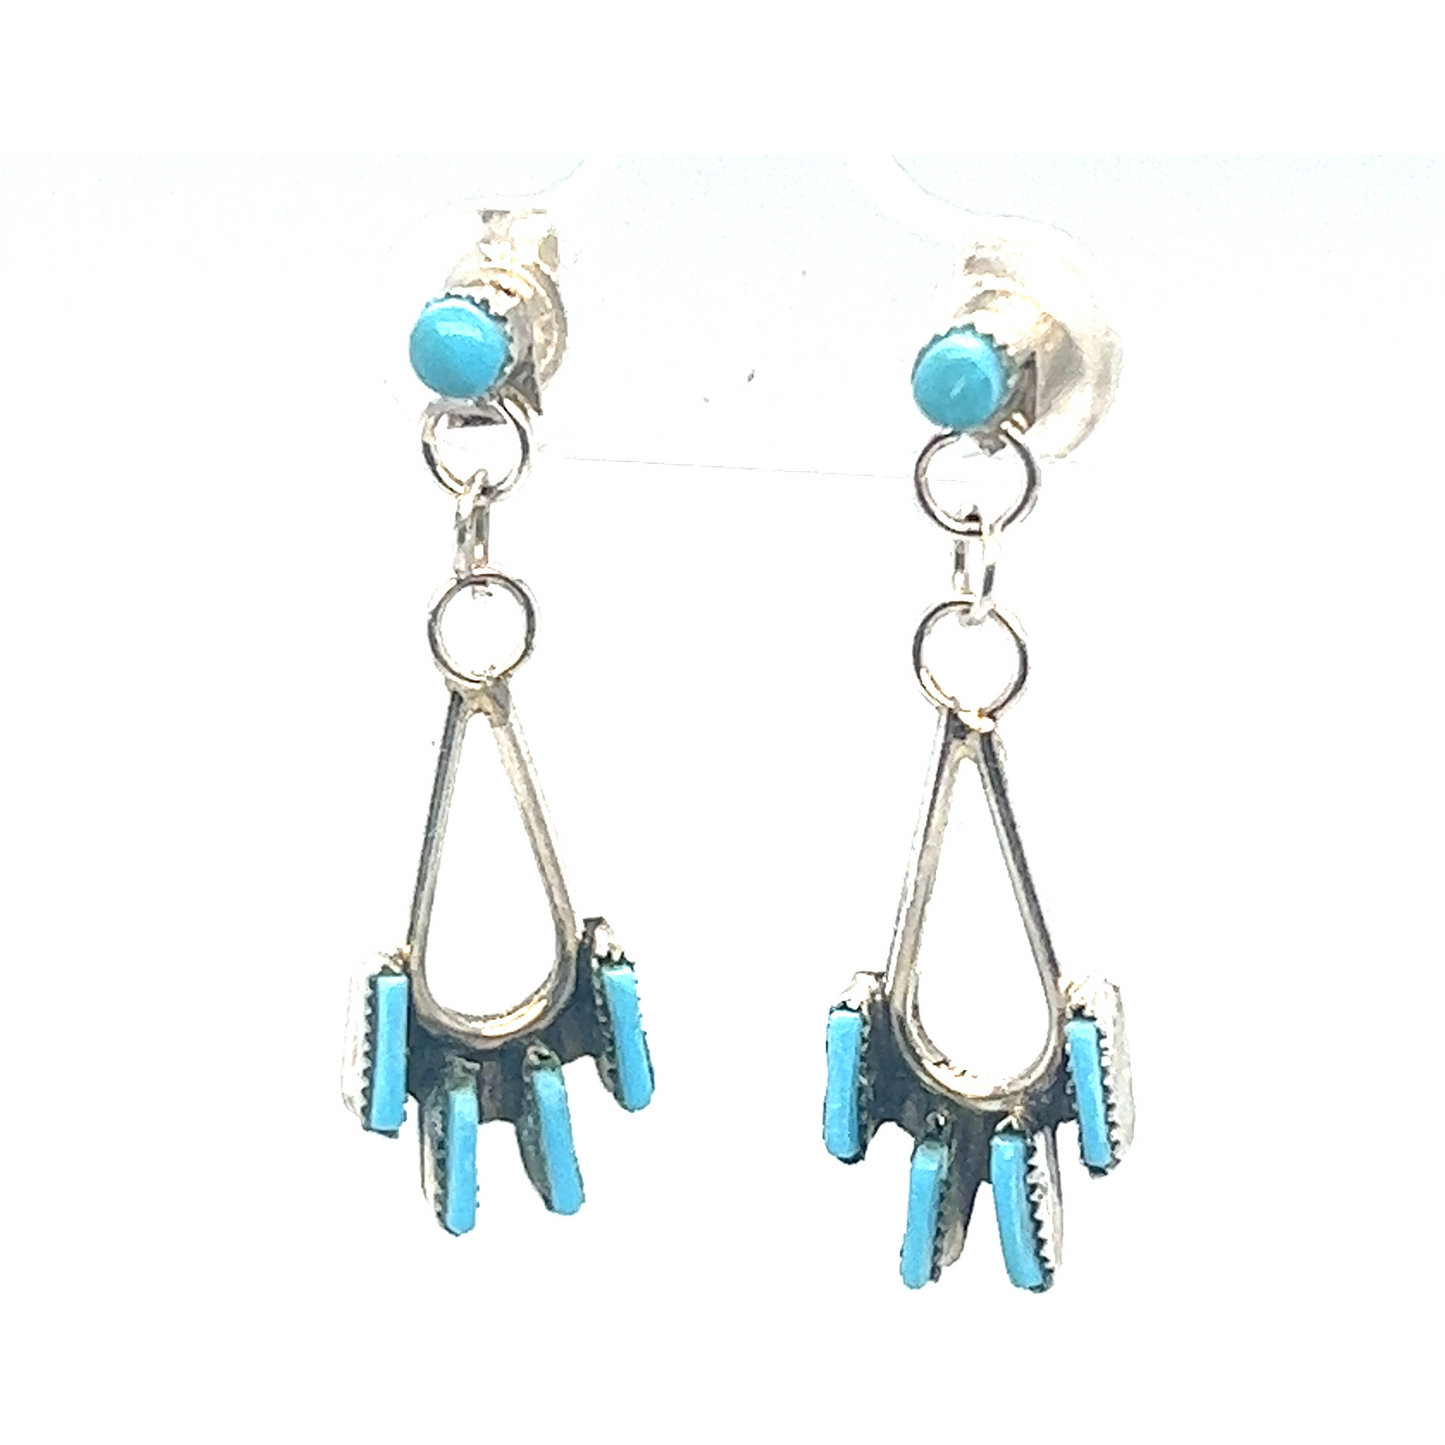 A pair of Super Silver Delicate Needlepoint Zuni Turquoise Earrings.